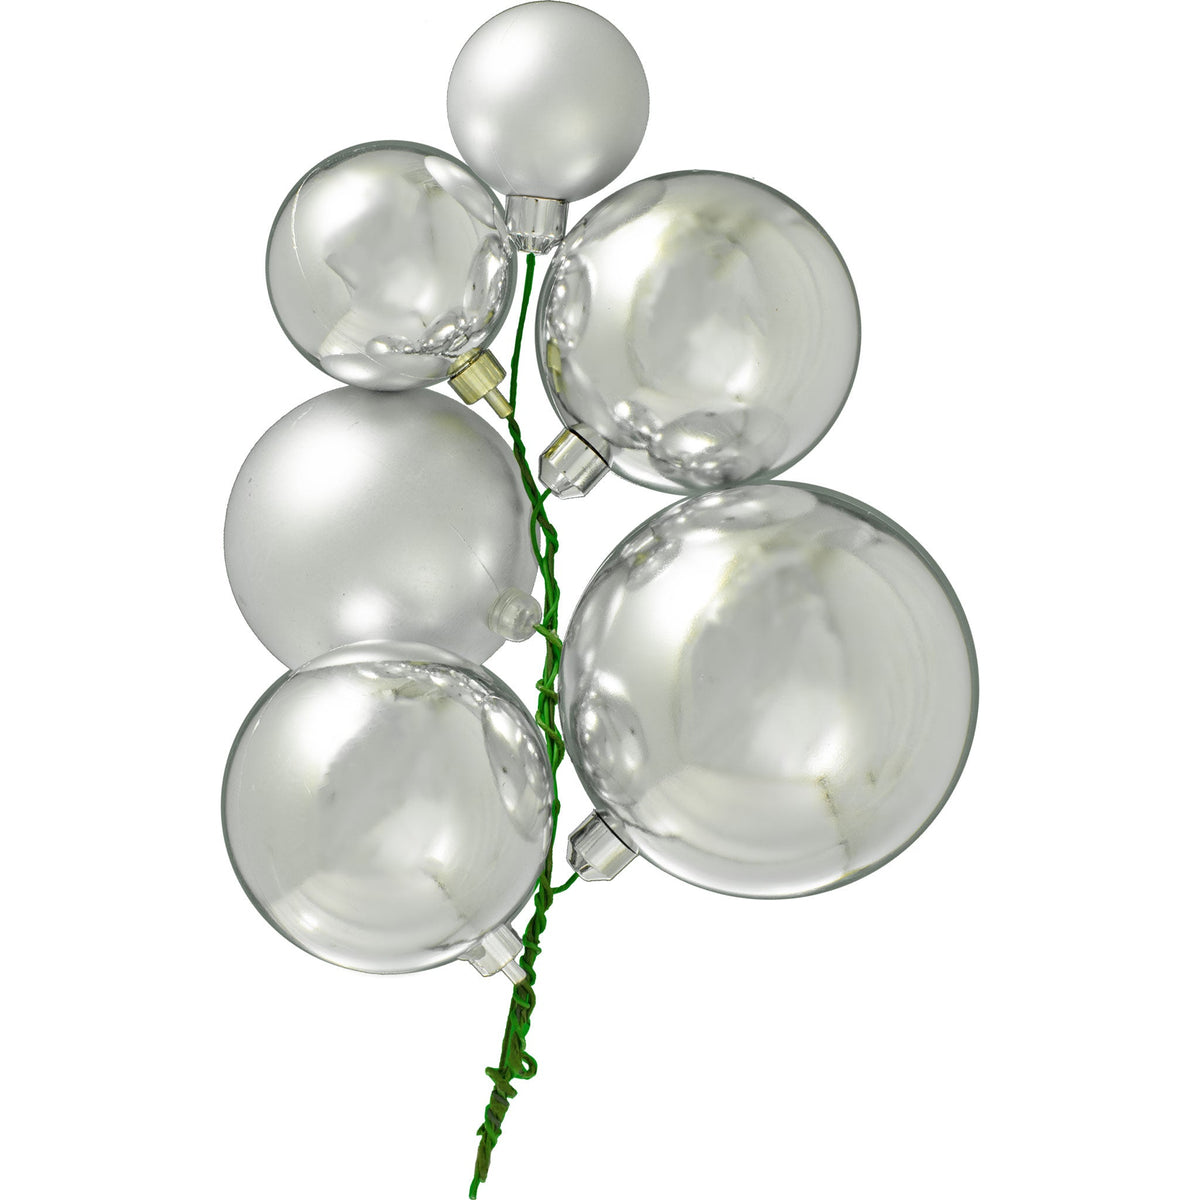 Lee Display's San Mateo Christmas Ball Ornament Cluster comes with Shiny Silver Ball Ornaments and Matte Silver